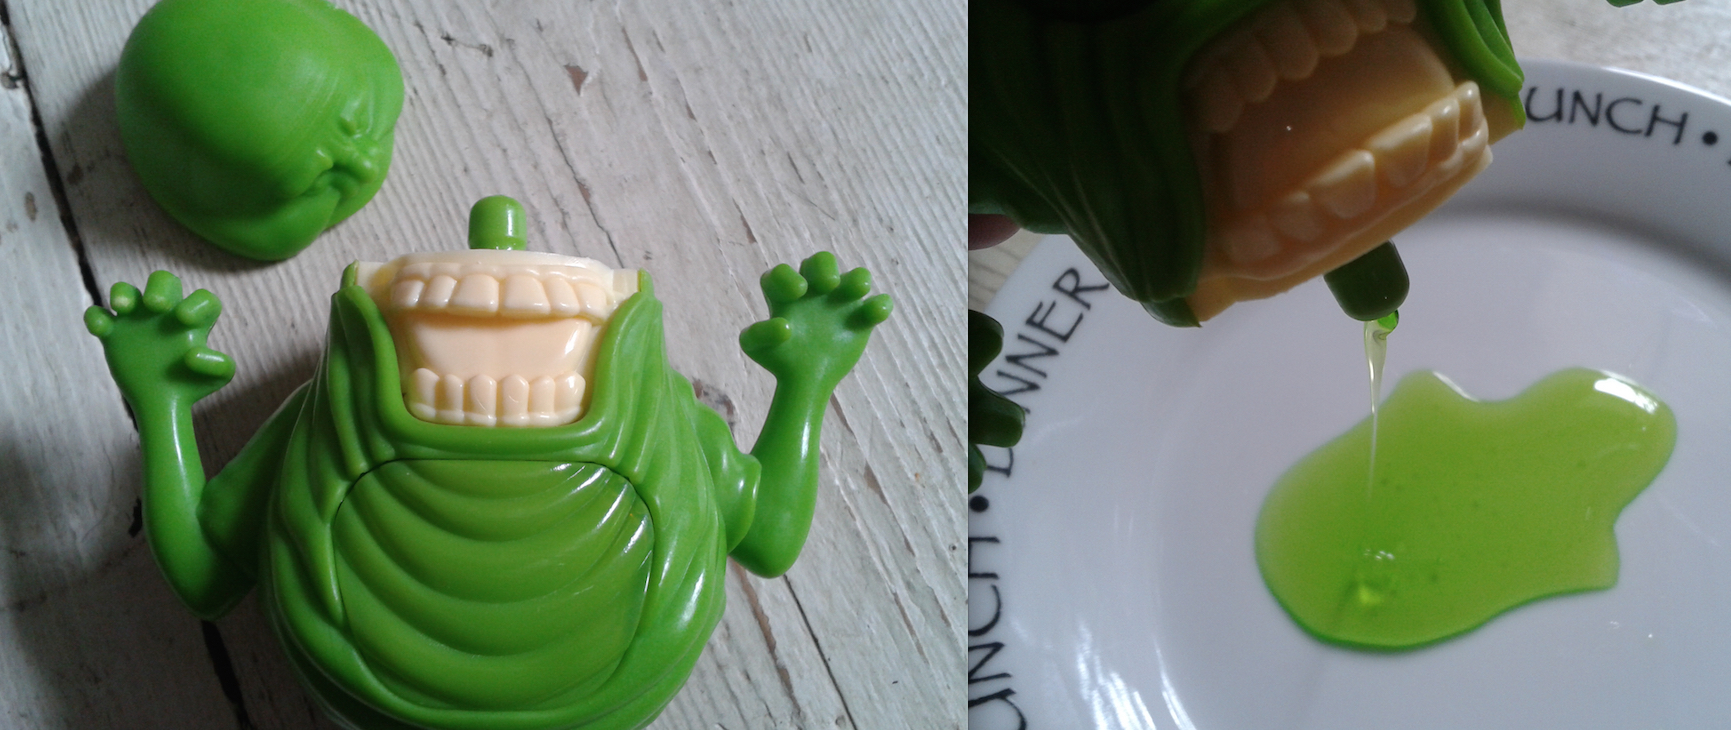 Slimer Edible Ectoplasm - Opening Container